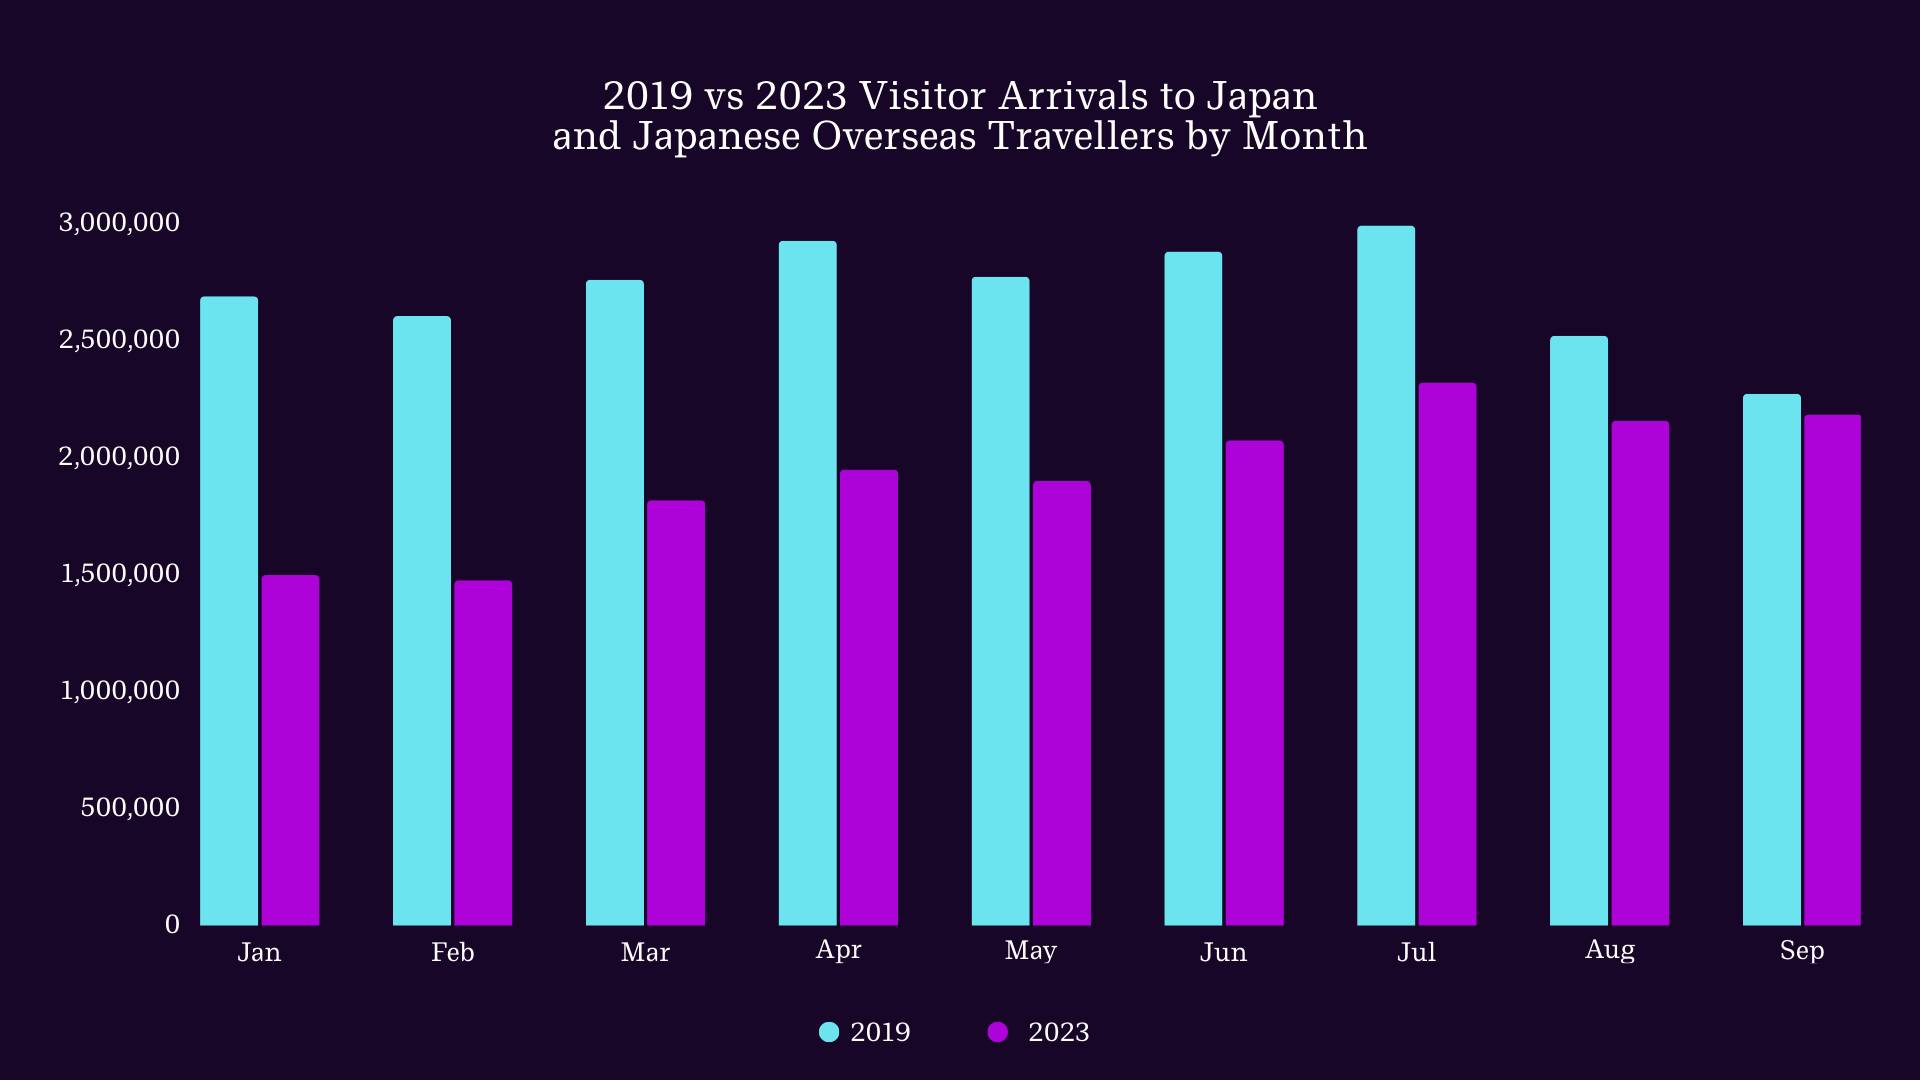 2019 vs 2023 Visitor Arrivals to Japan and Japanese Overseas Travellers by Month